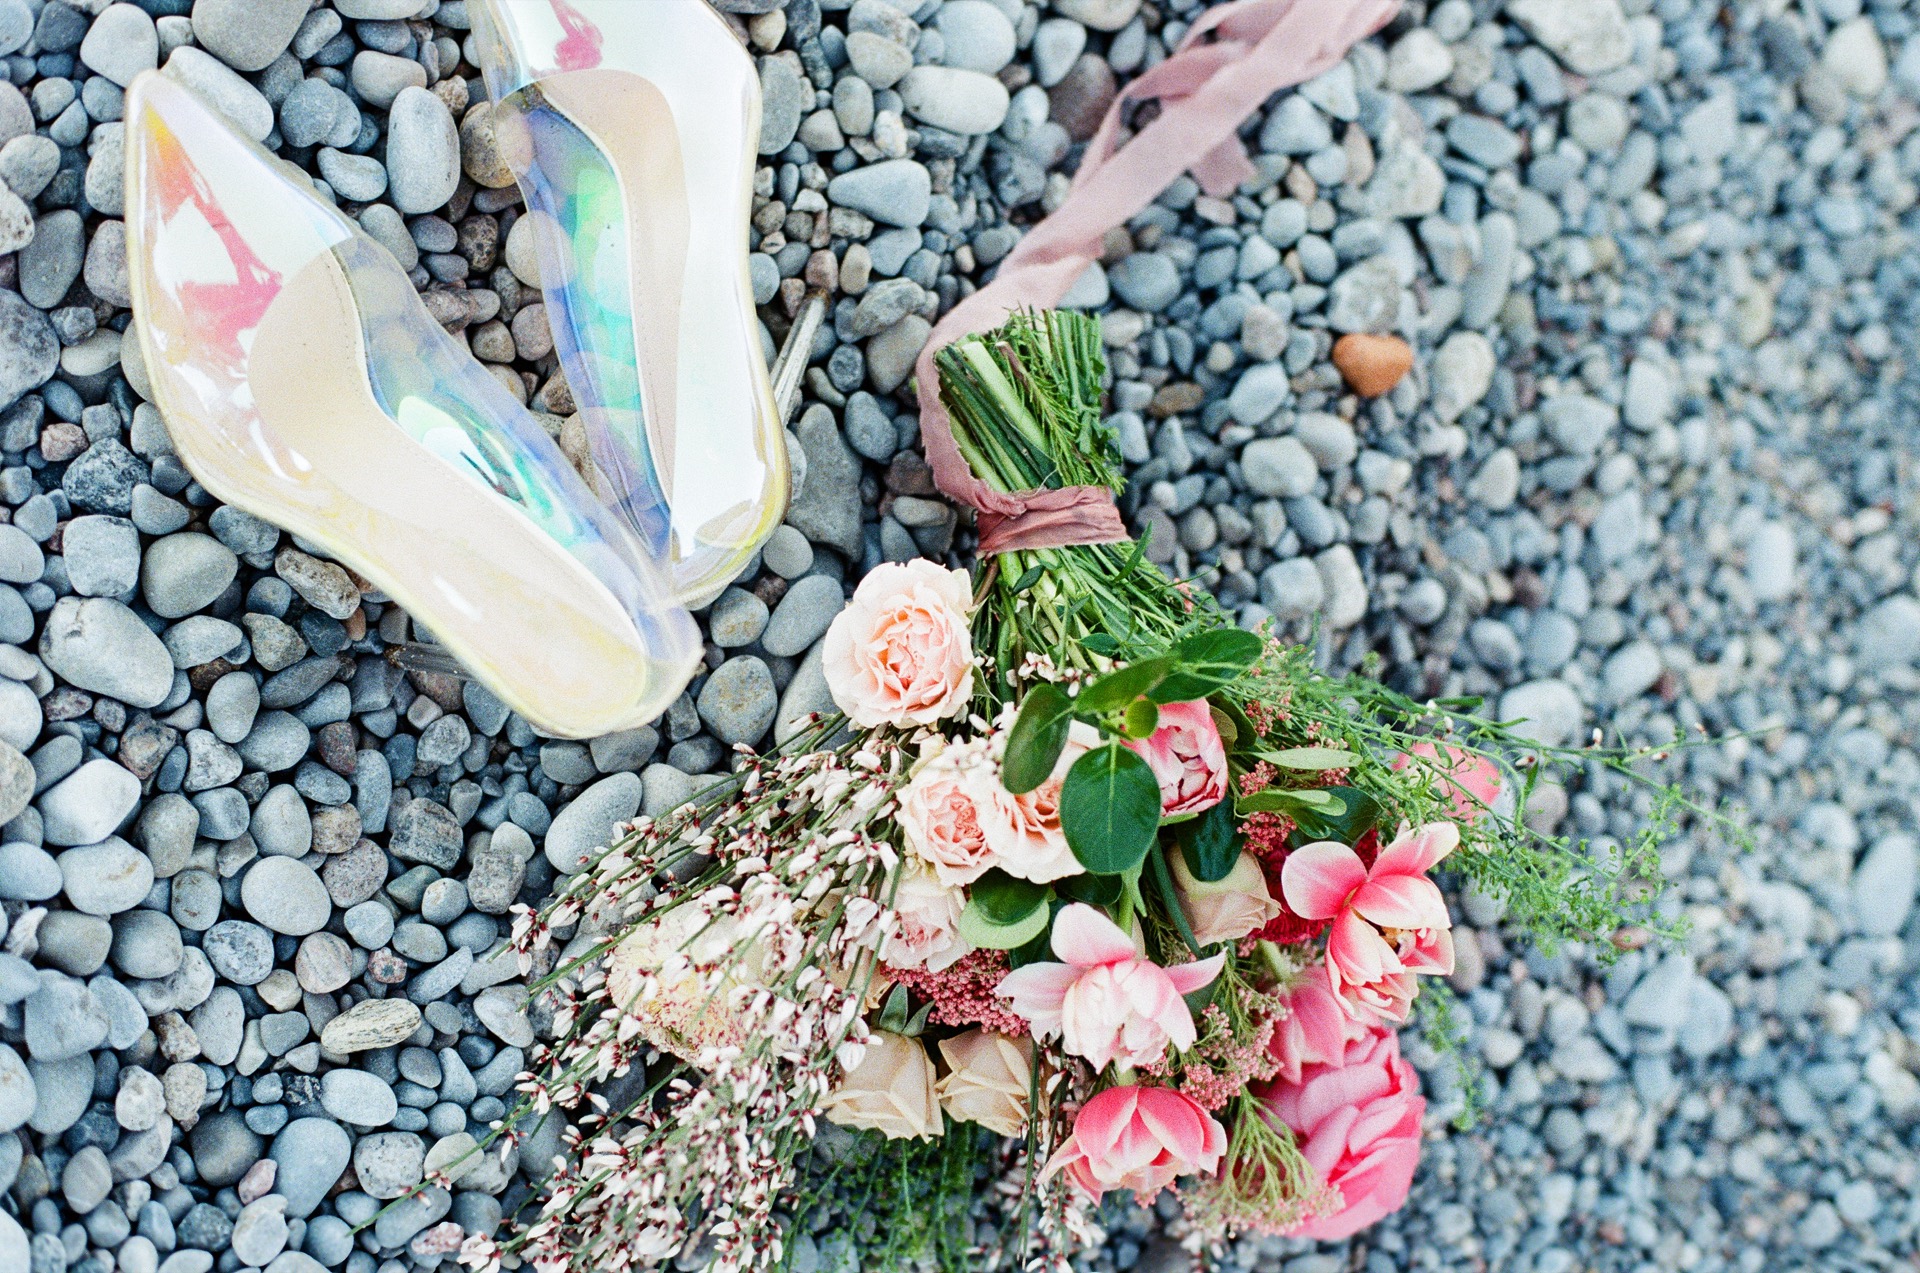 A pair of colourful wedding shoe displayed by the side of a wedding bouquet.